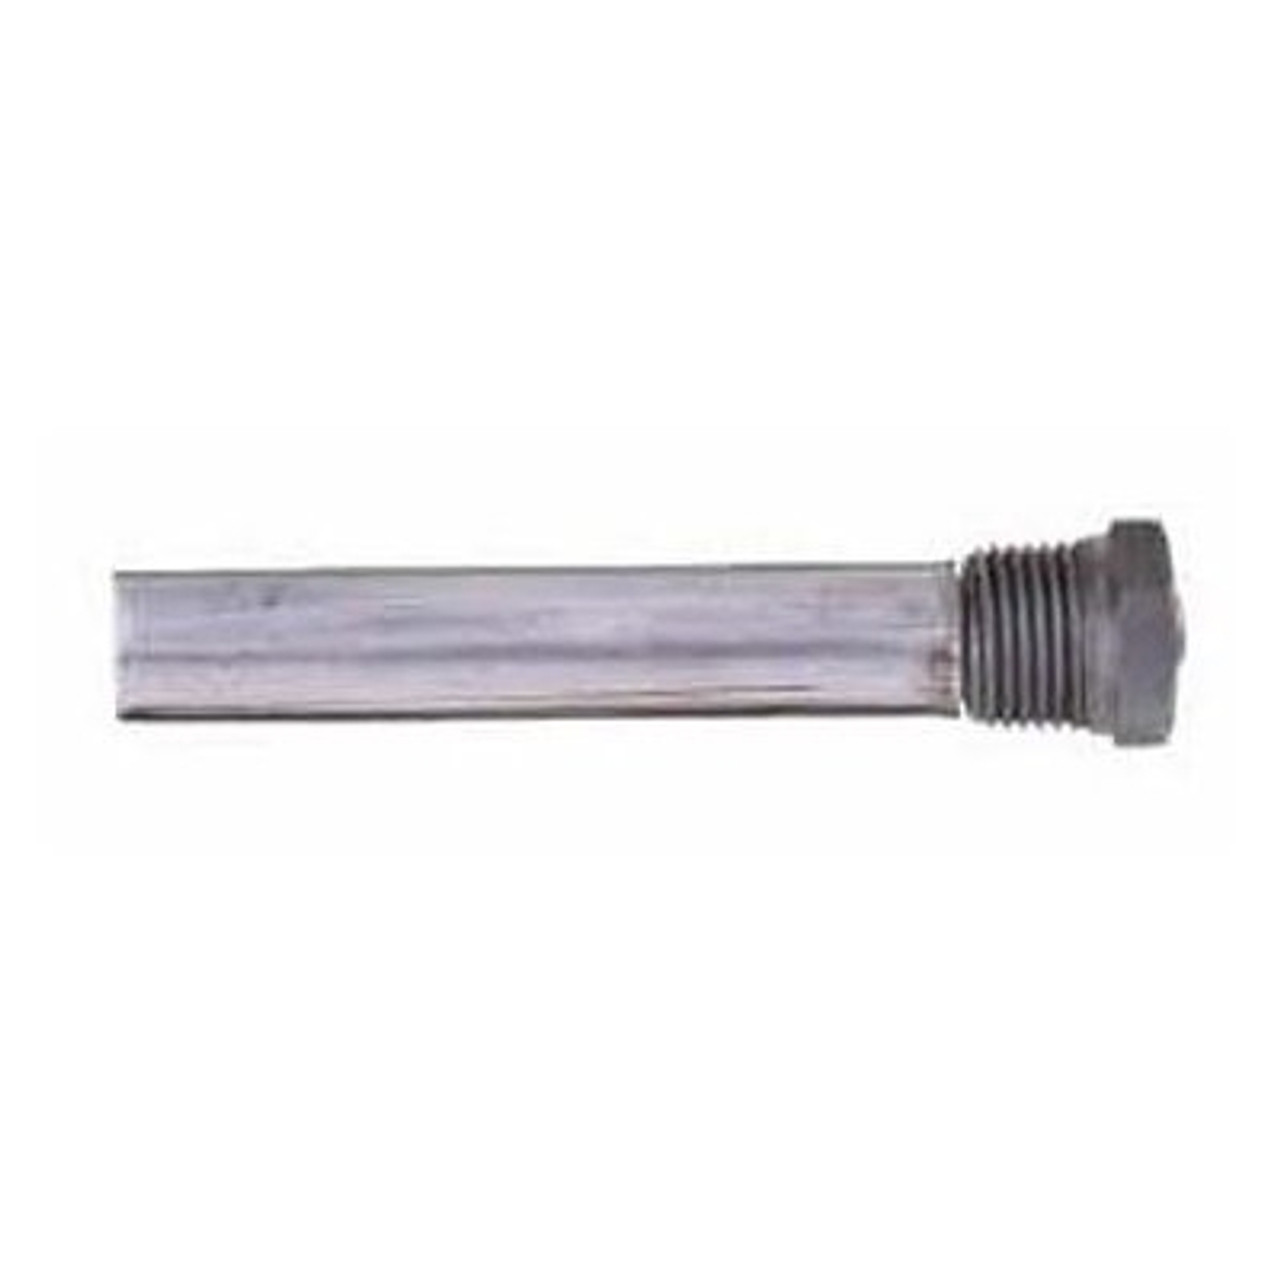 Camco 11553 Rv Magnesium Anode Rod Fits Atwood Heaters Rotometals